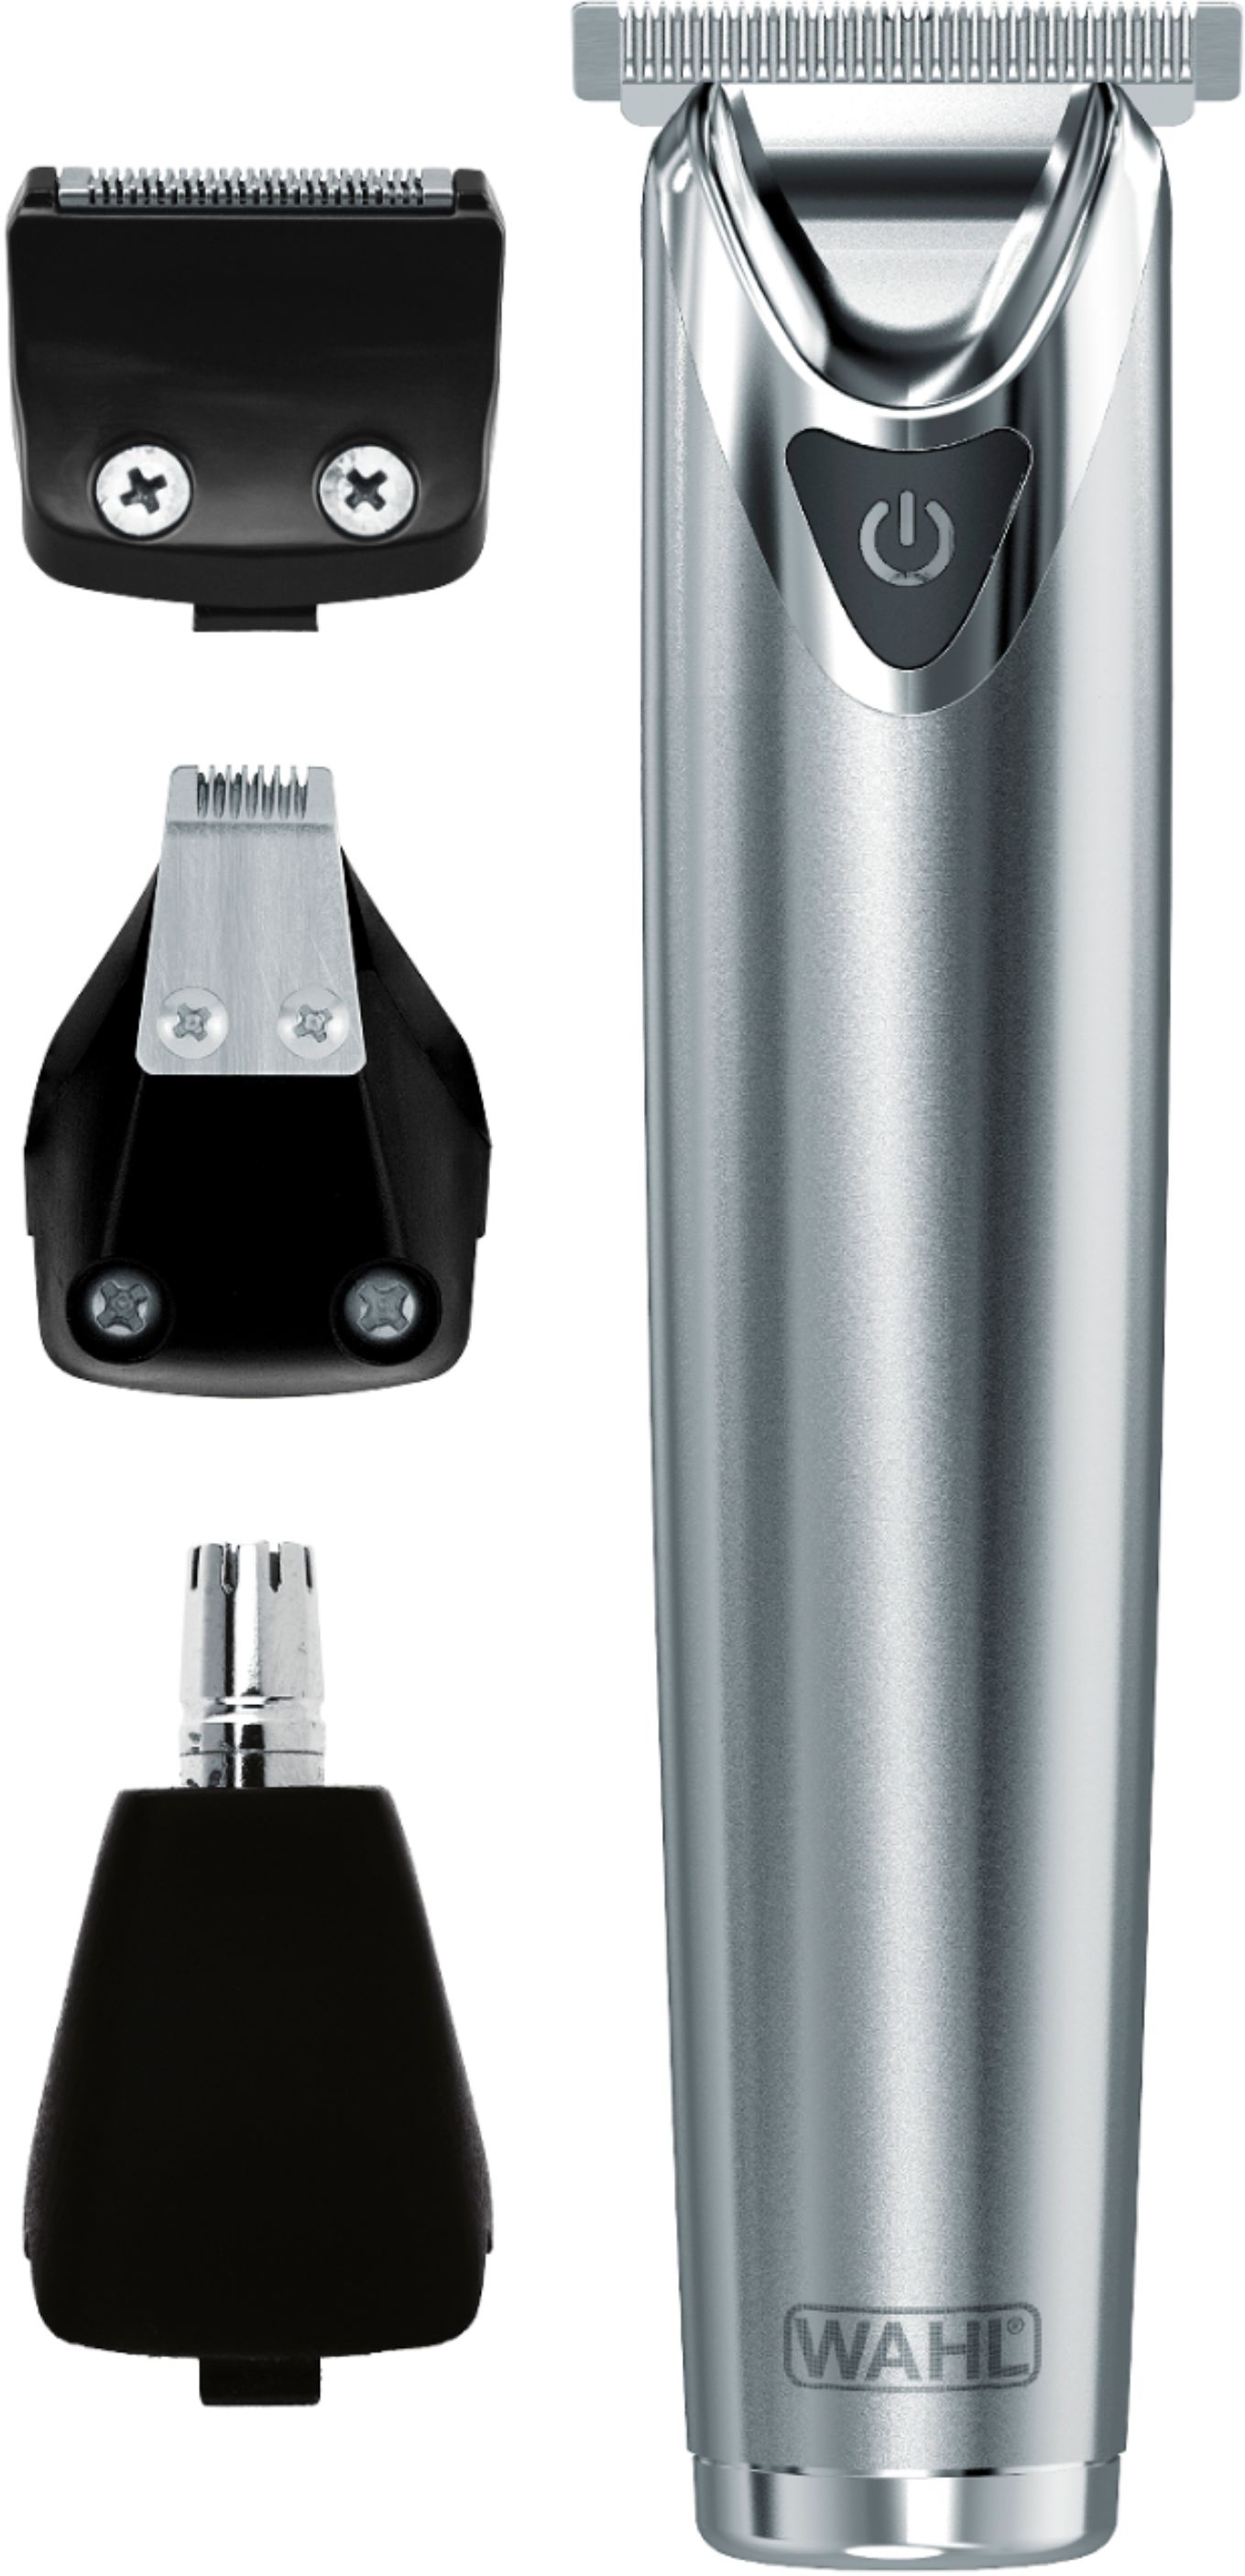 Wahl Lithium Ion +™ Beard Trimmer Stainless Steel 09818-5001 - Best Buy Wahl Lithium Ion Trimmer Stainless Steel